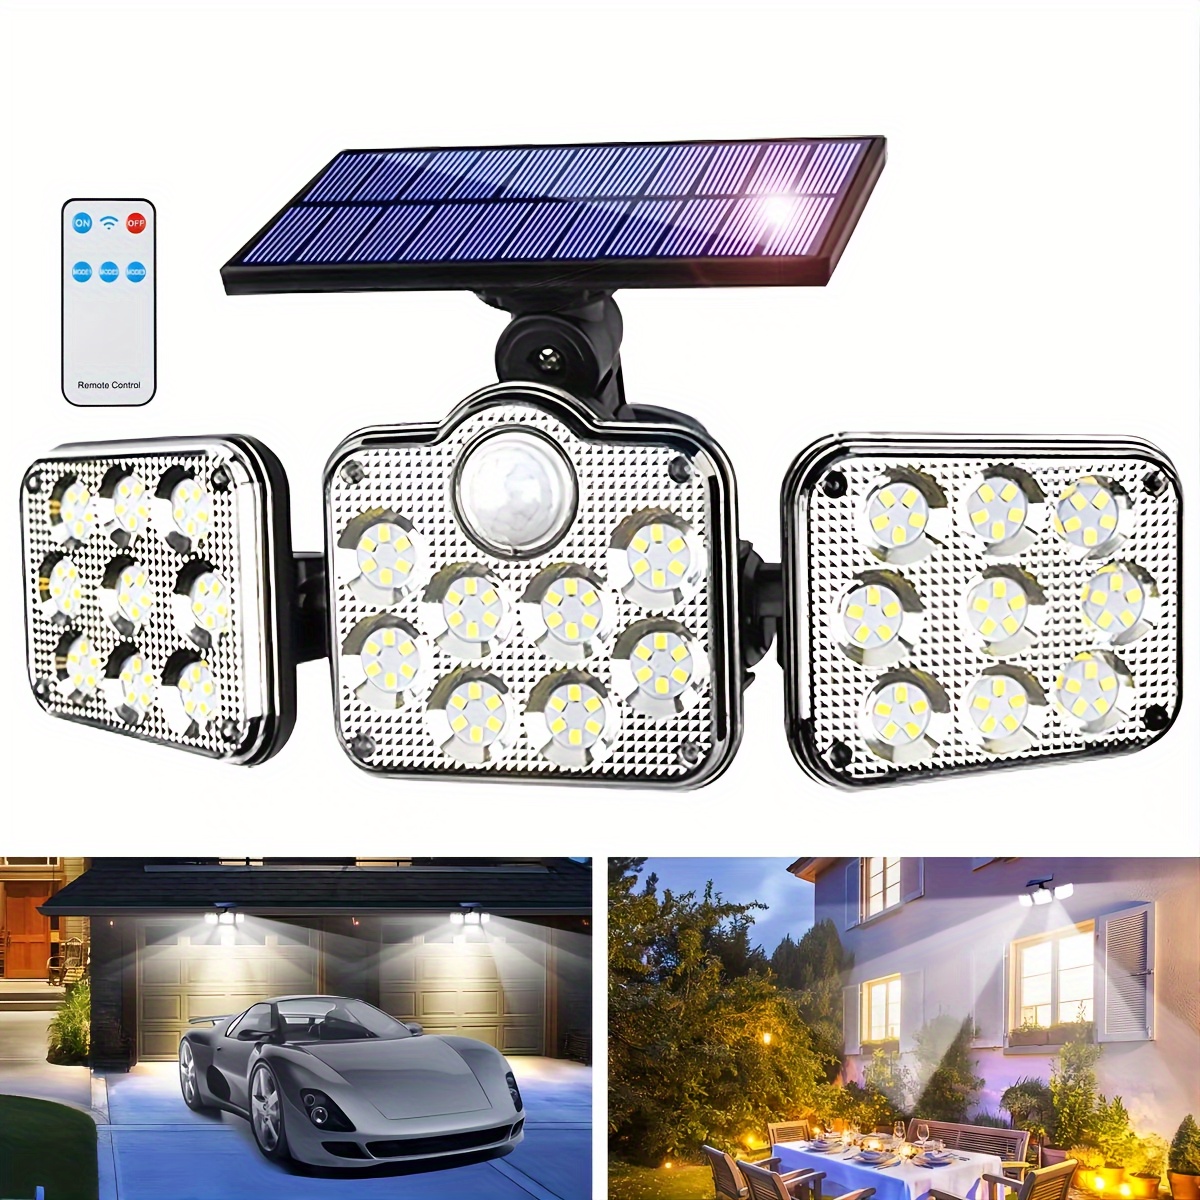 

1pc/2pcs, Solar-powered Led Wall Lights With Smart Motion Sensor, 3 Lighting Modes, Outdoor Lighting Fixture For Garden, Lawn, Fence - Remote Controlled